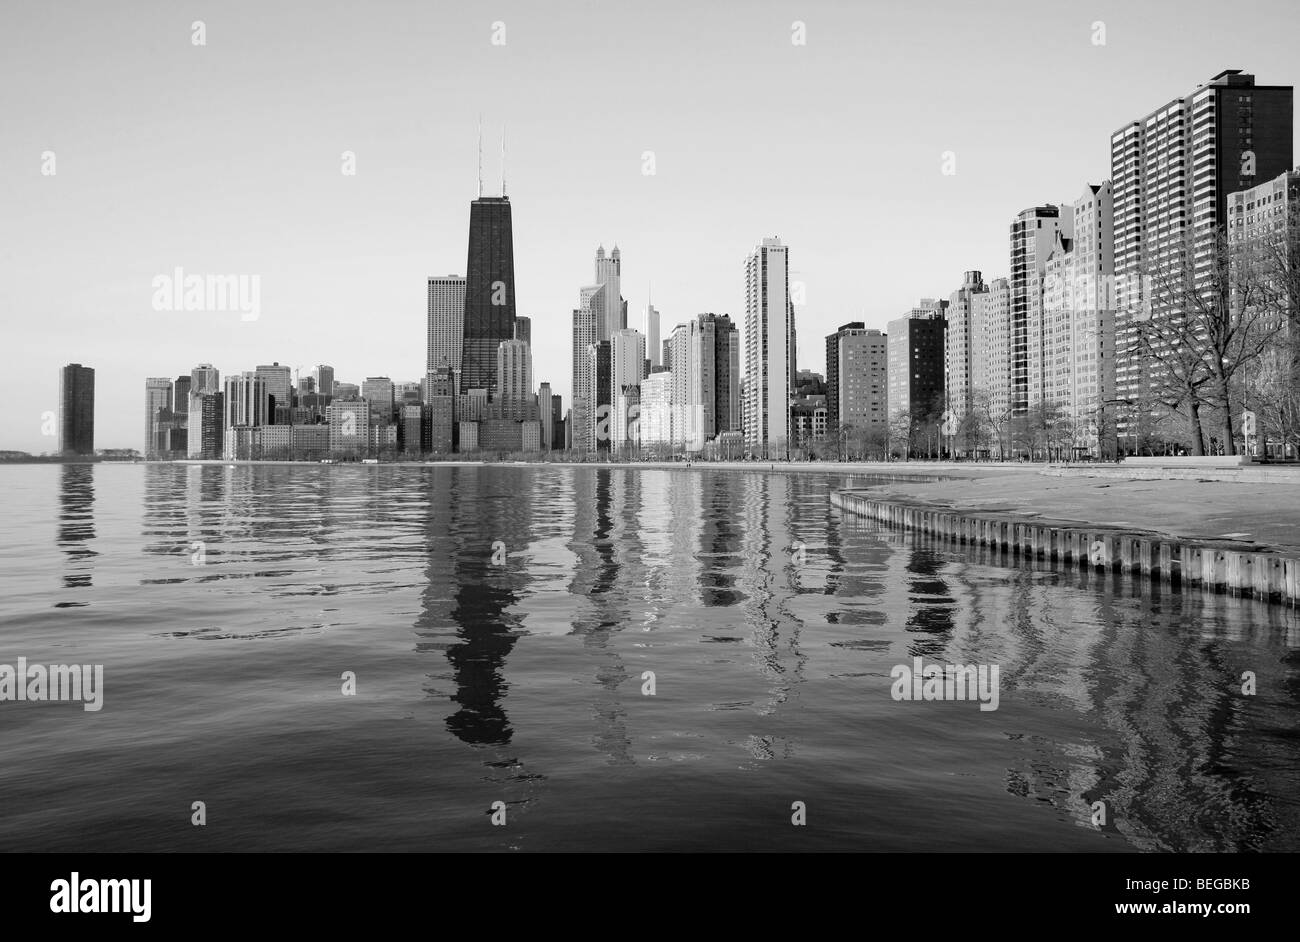 Downtown Chicago Illinois city skyline in early morning with Lake Michigan reflection cityscape Stock Photo